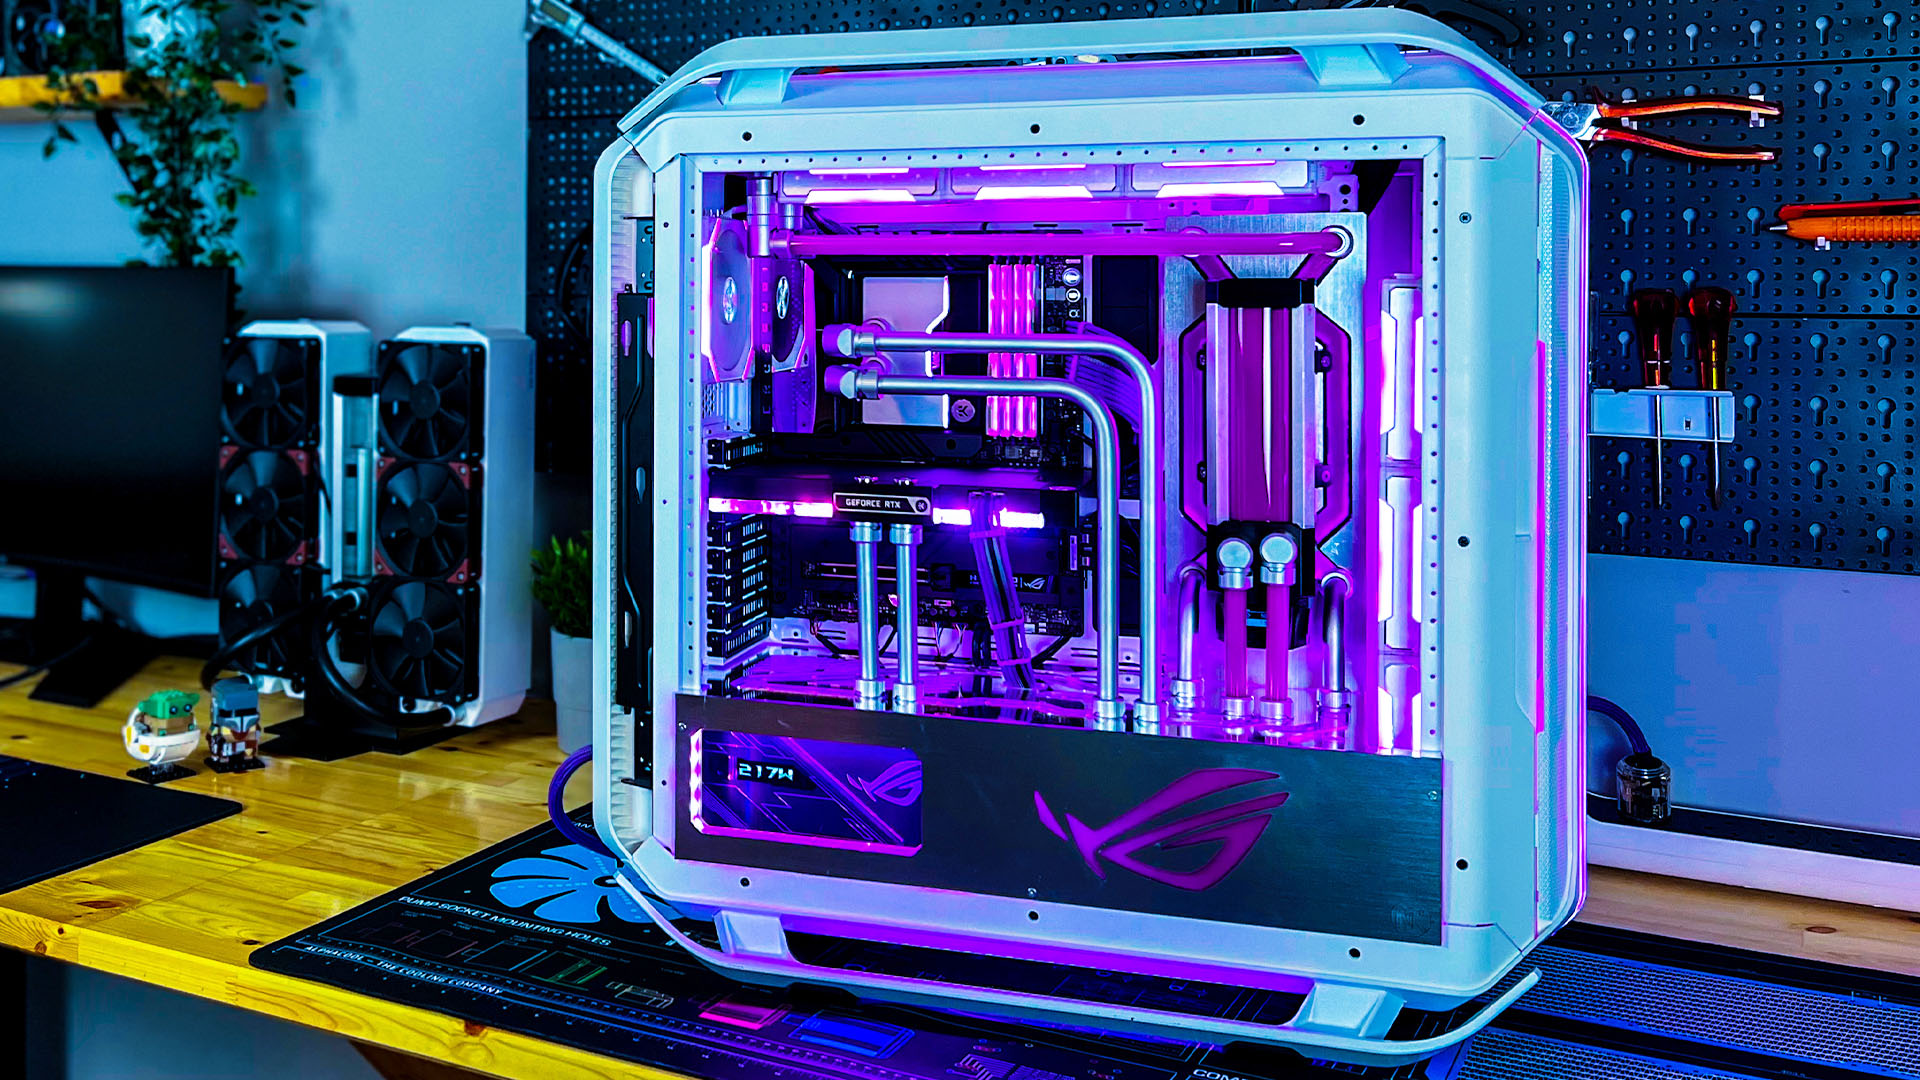 Gaze into the reflection of this stunning AMD water-cooled PC build